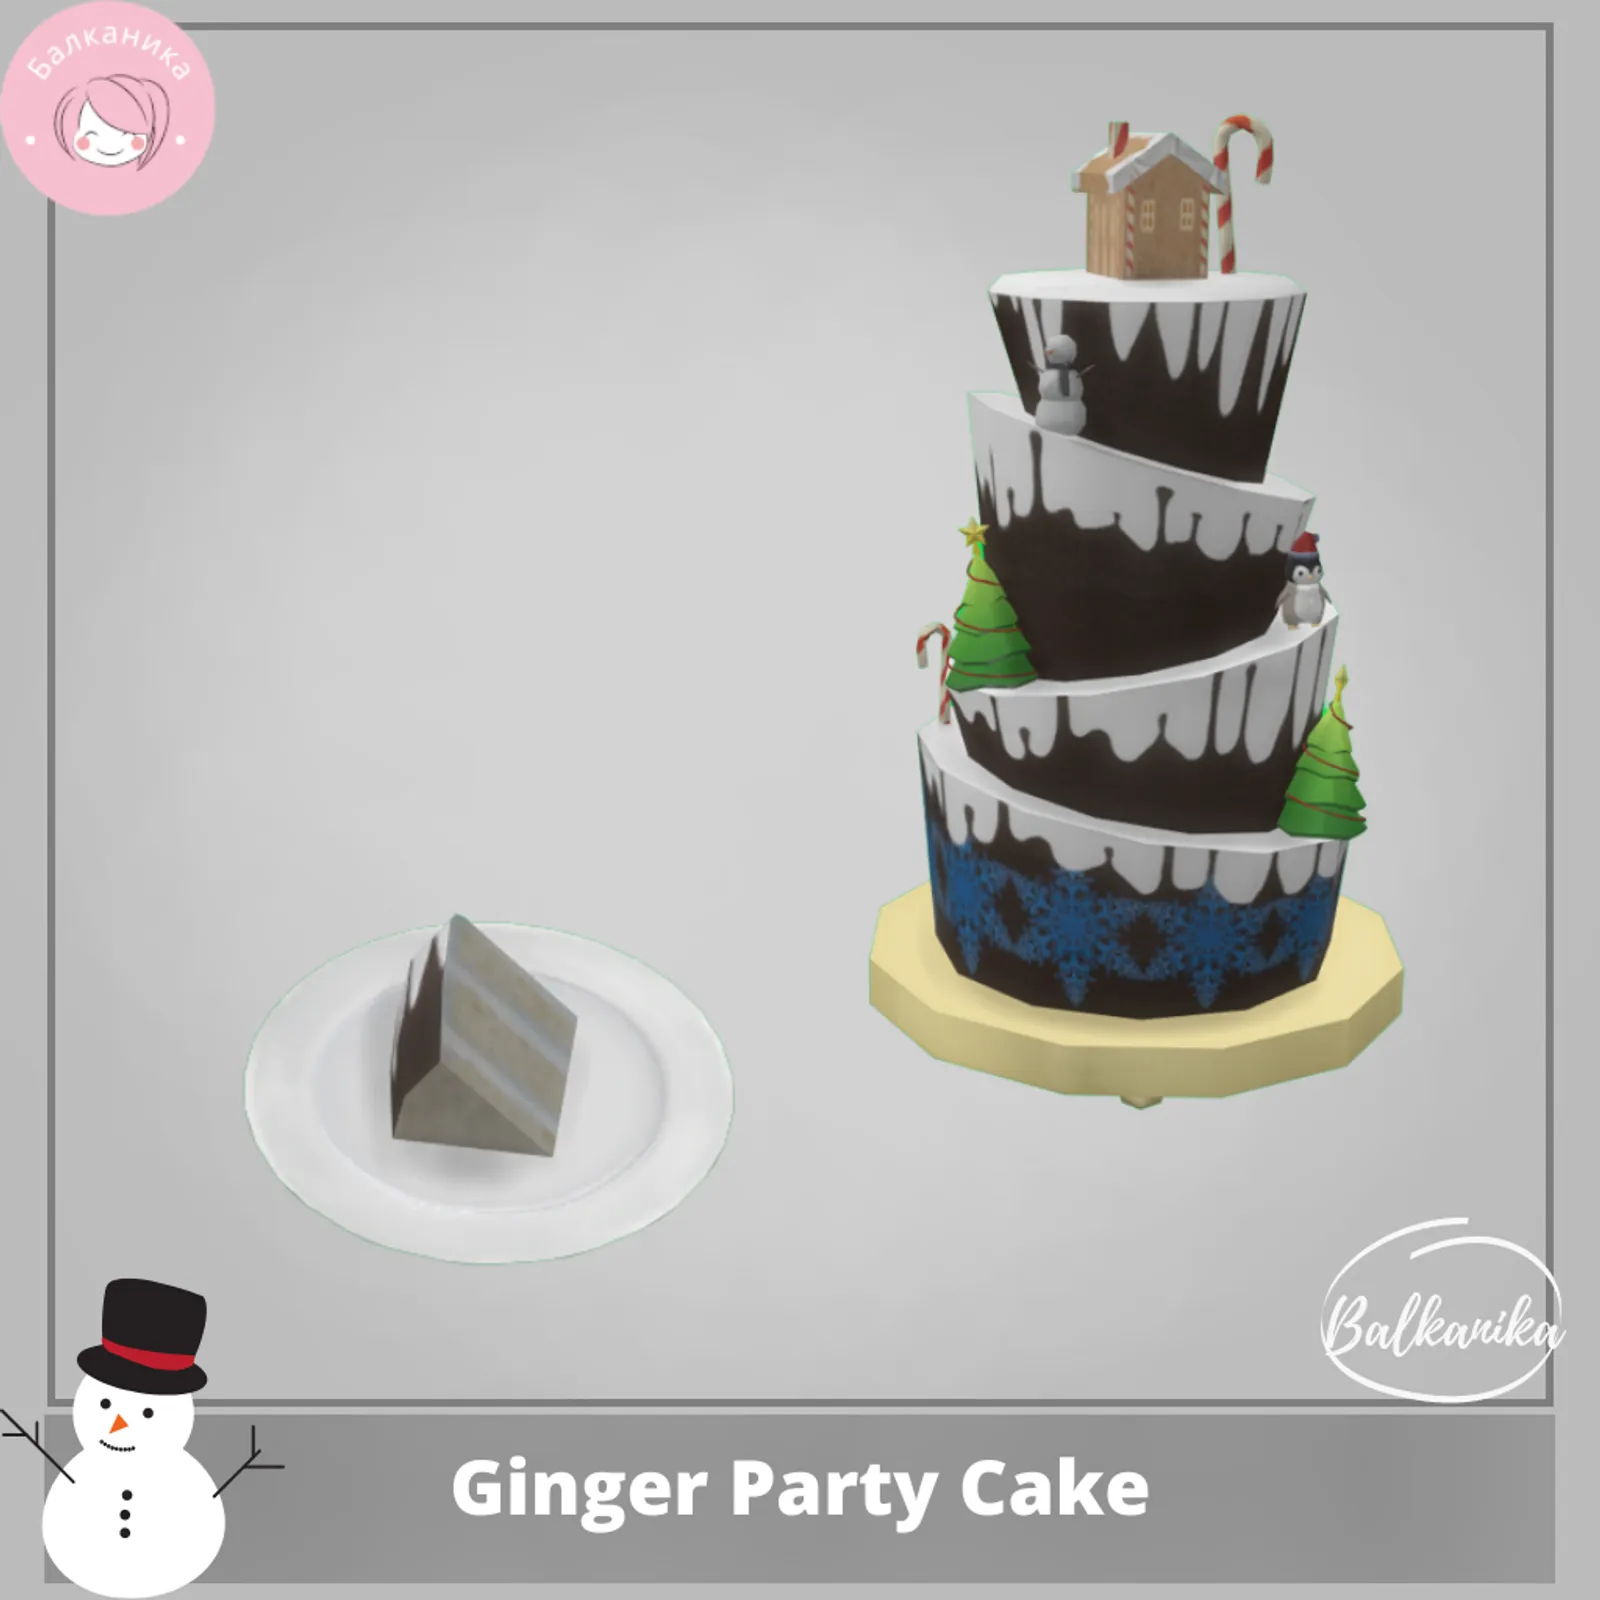 Ginger Party Cake